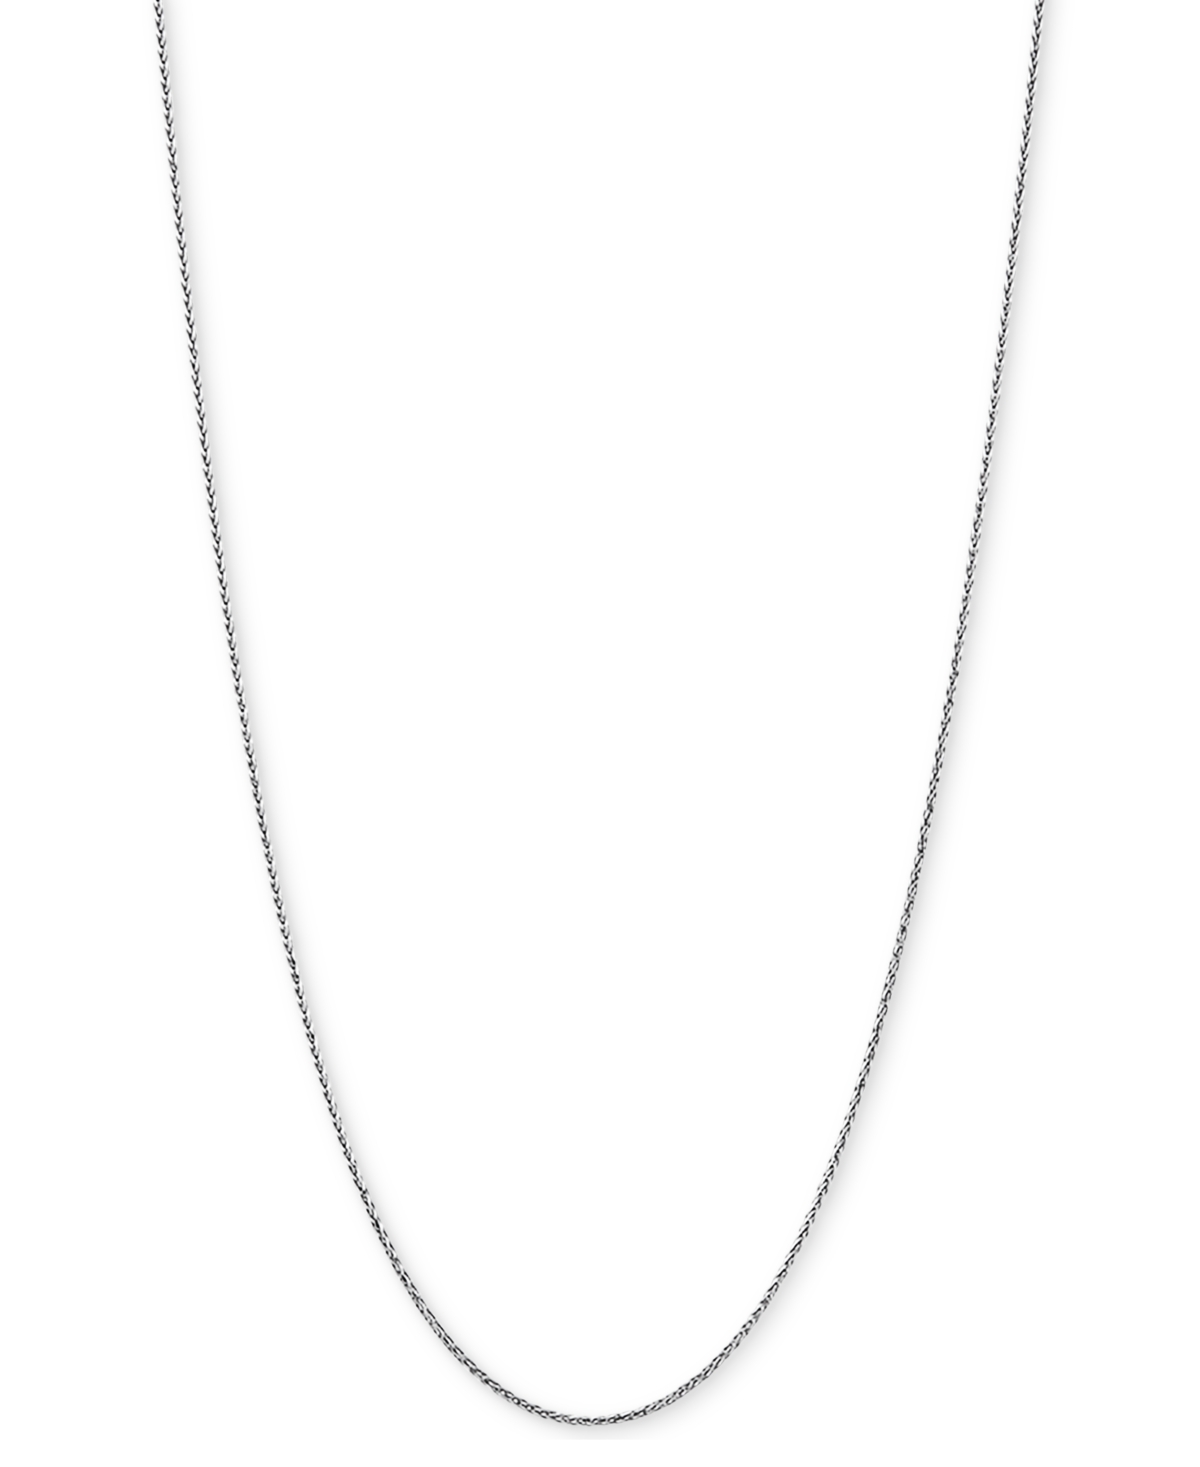 Wheat Link 18" Chain Necklace in 14k Gold - White Gold